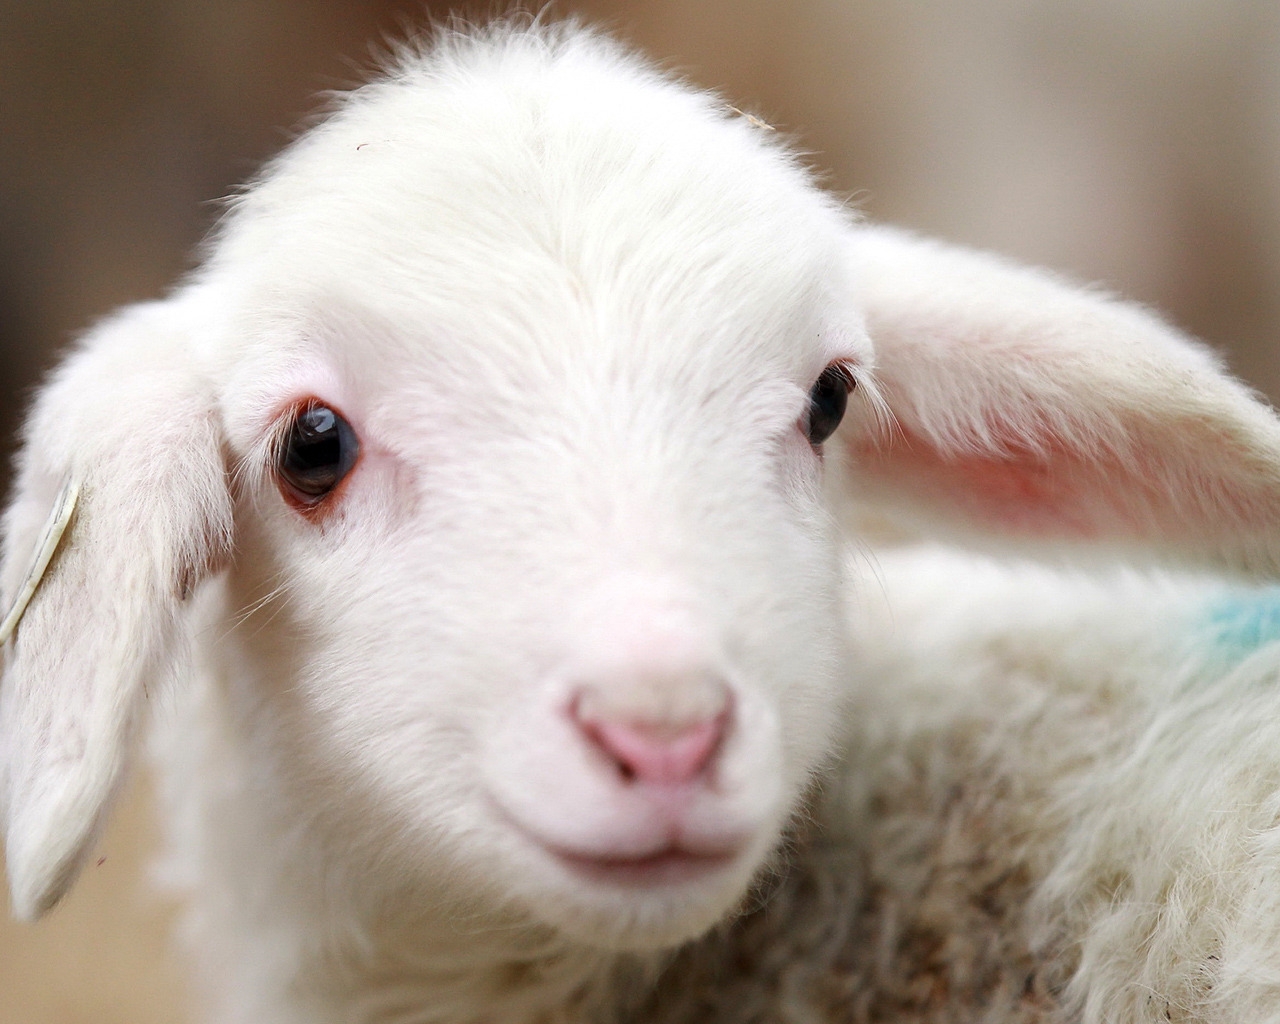 Cute Lamb for 1280 x 1024 resolution